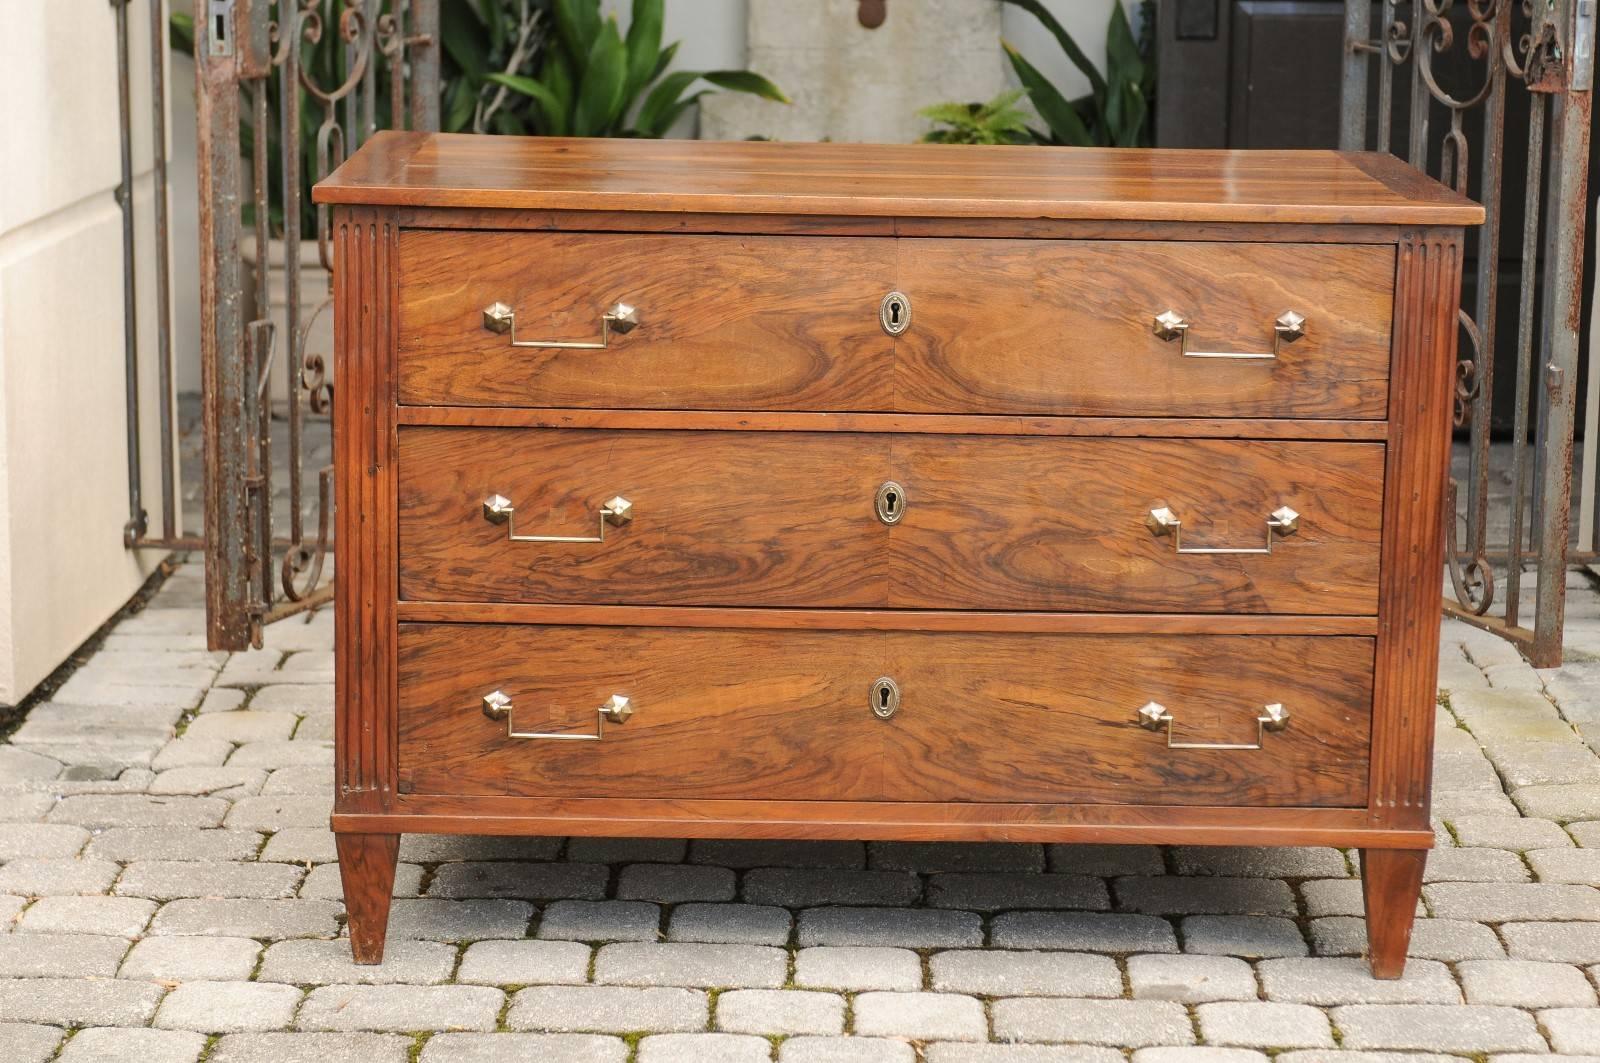 A French Directoire style three-drawer commode from the first half of the 19th century with bookmarked walnut veneer, fluted side posts and tapered feet. This French commode features a rectangular planked top sitting above three exquisite bookmarked